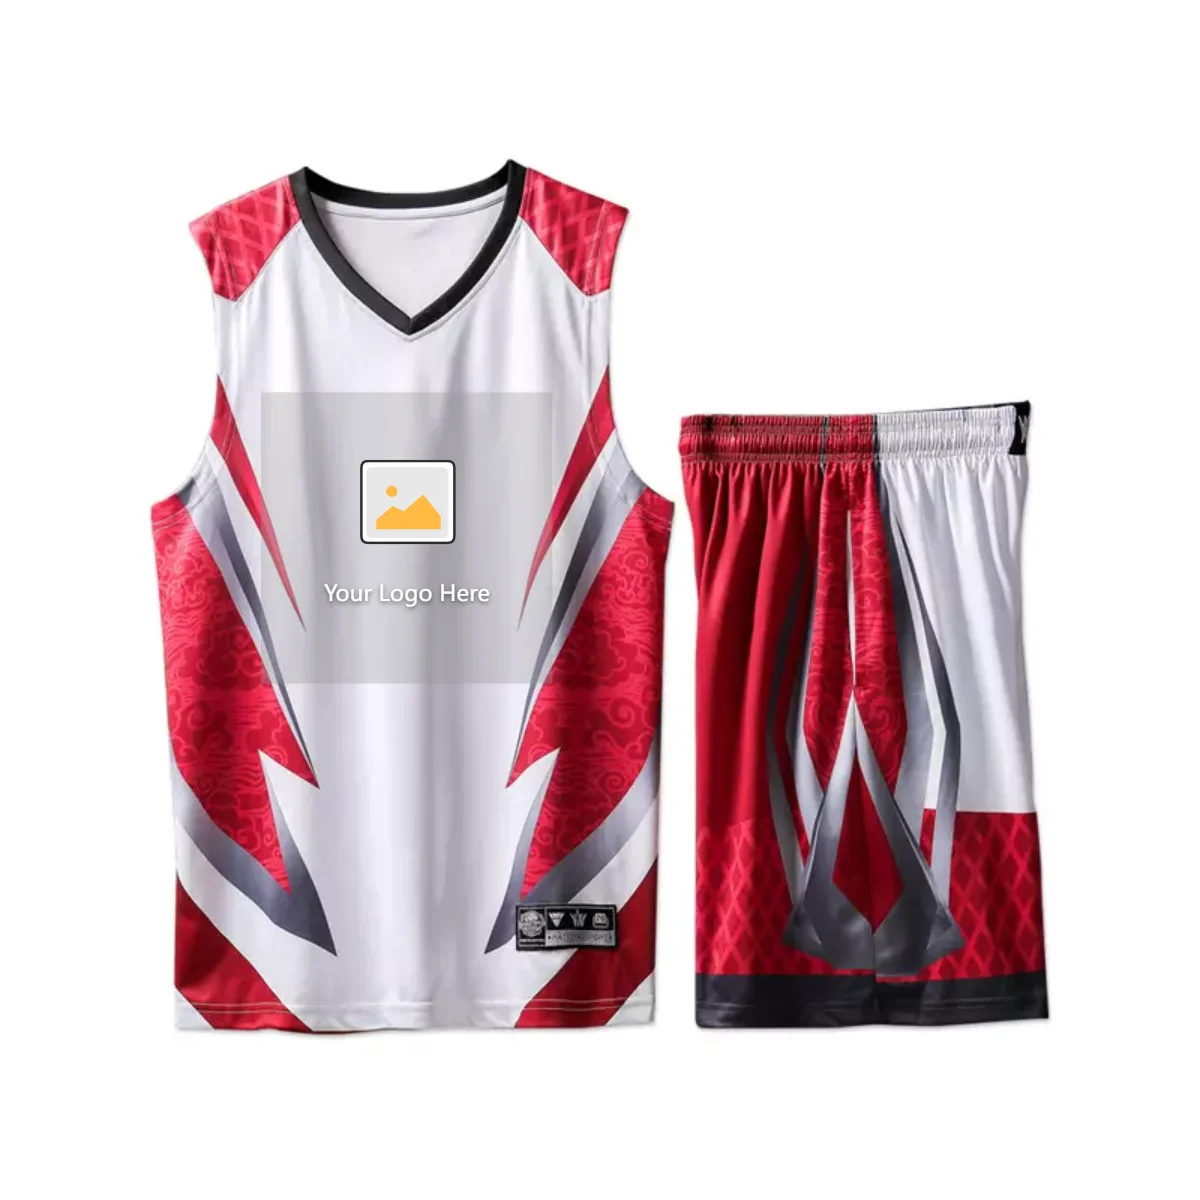 Topeter Men’s Basketball Jersey and Shorts Team Uniform with Pockets Sportswear Uniform 